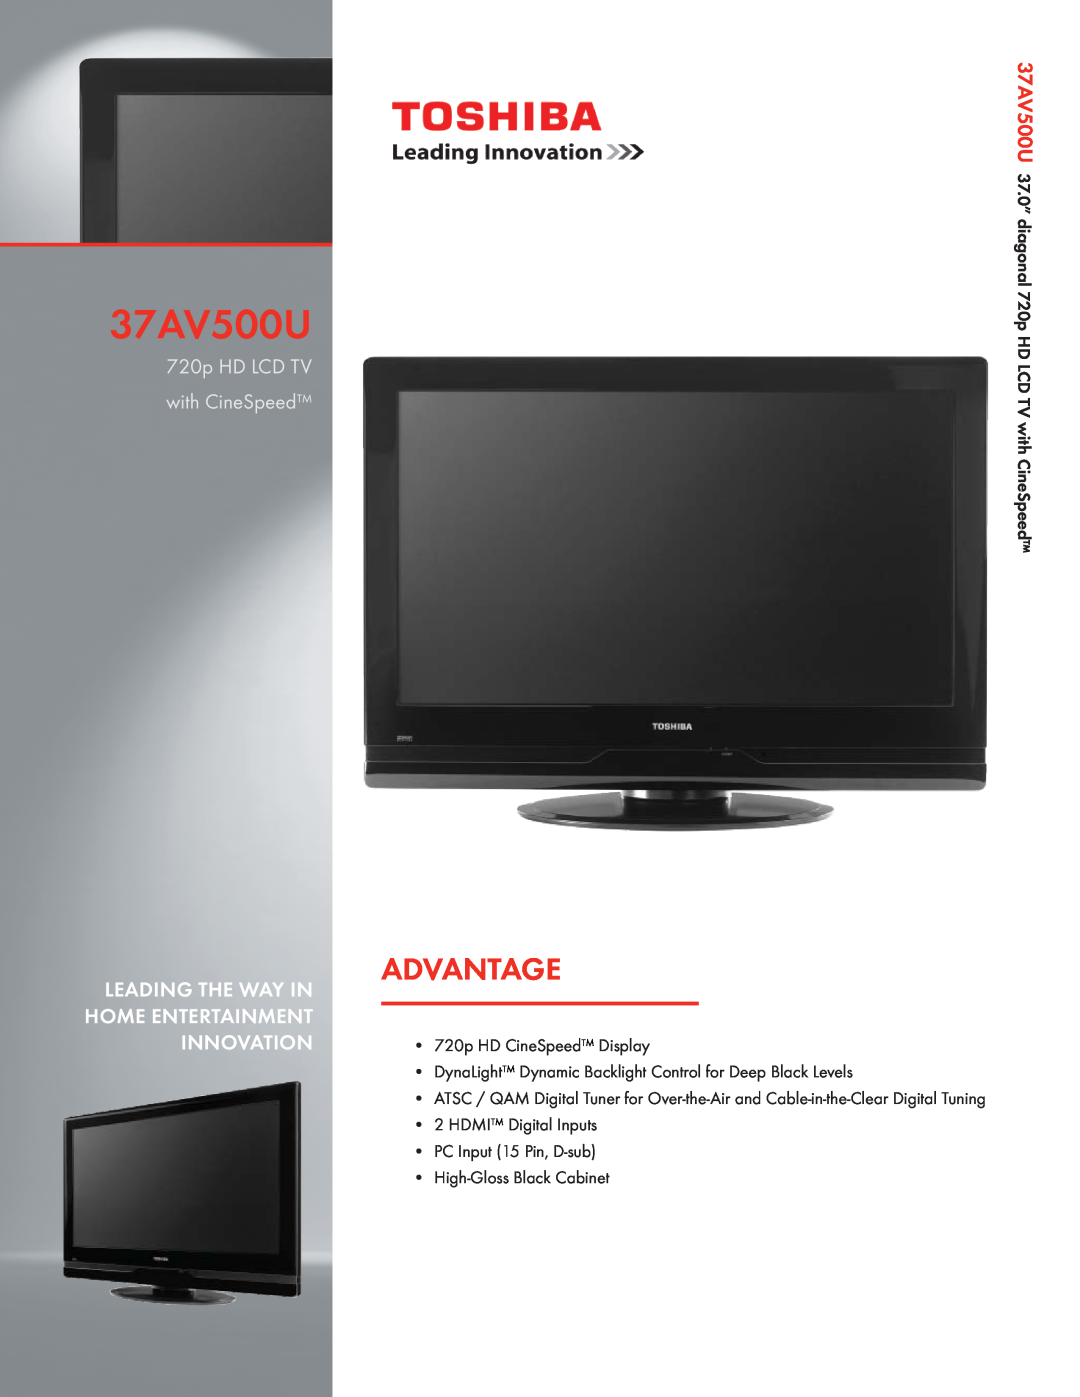 Toshiba 37AV500U manual Advantage, 720p HD LCD TV with CineSpeed, Leading The Way In Home Entertainment Innovation 